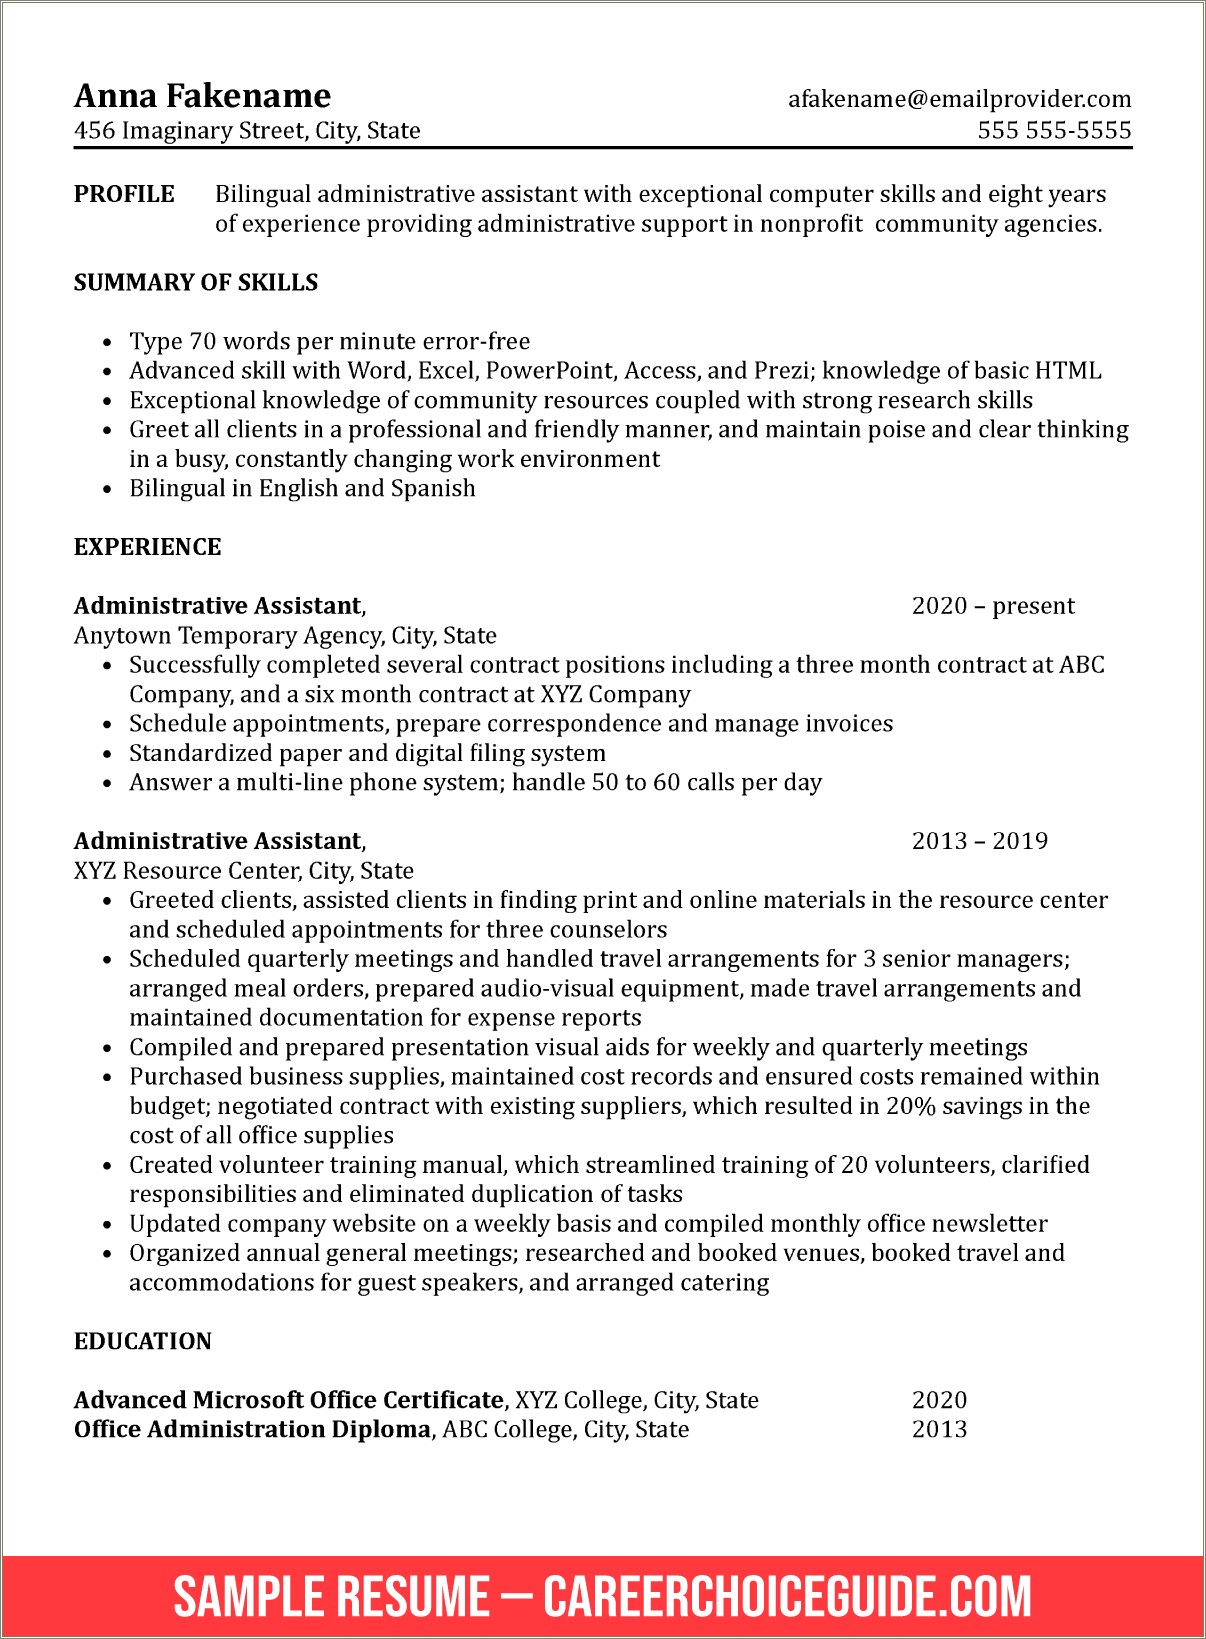 A Sample Resume For Administrative Assistant